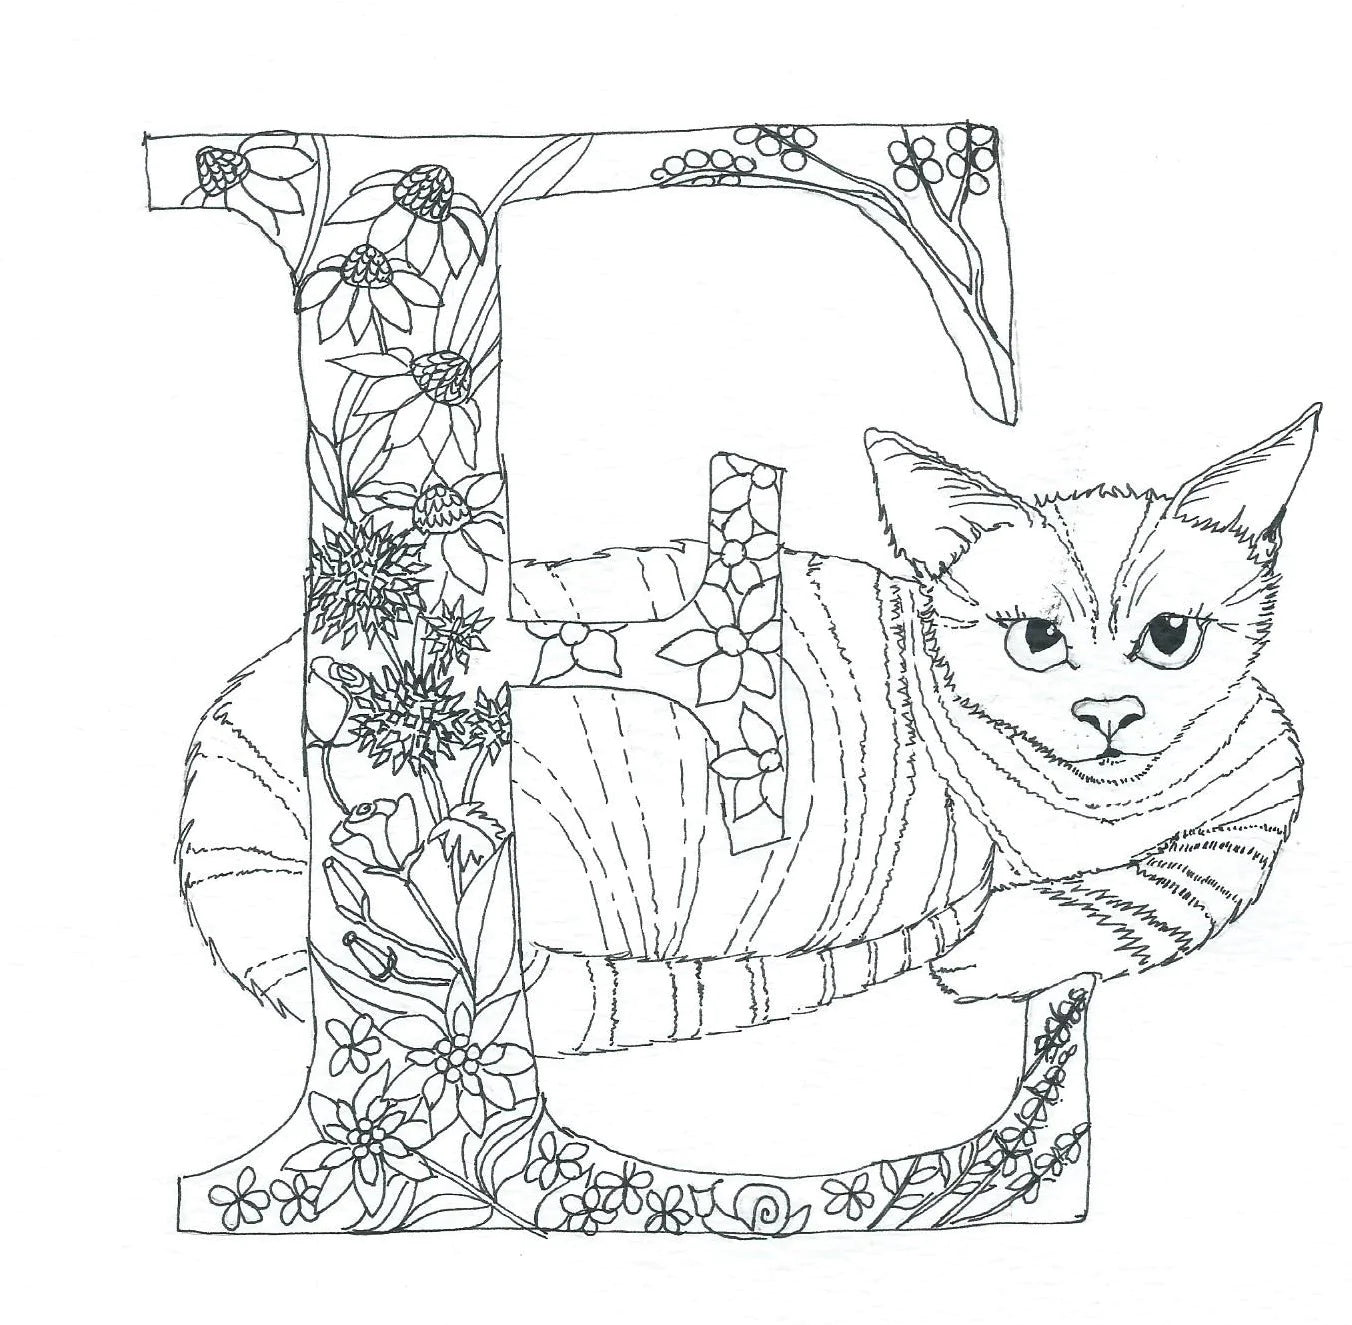 'Holly and the Cross-Stitch Cats' - A Storybook Colouring Experience for Children and Grown-ups